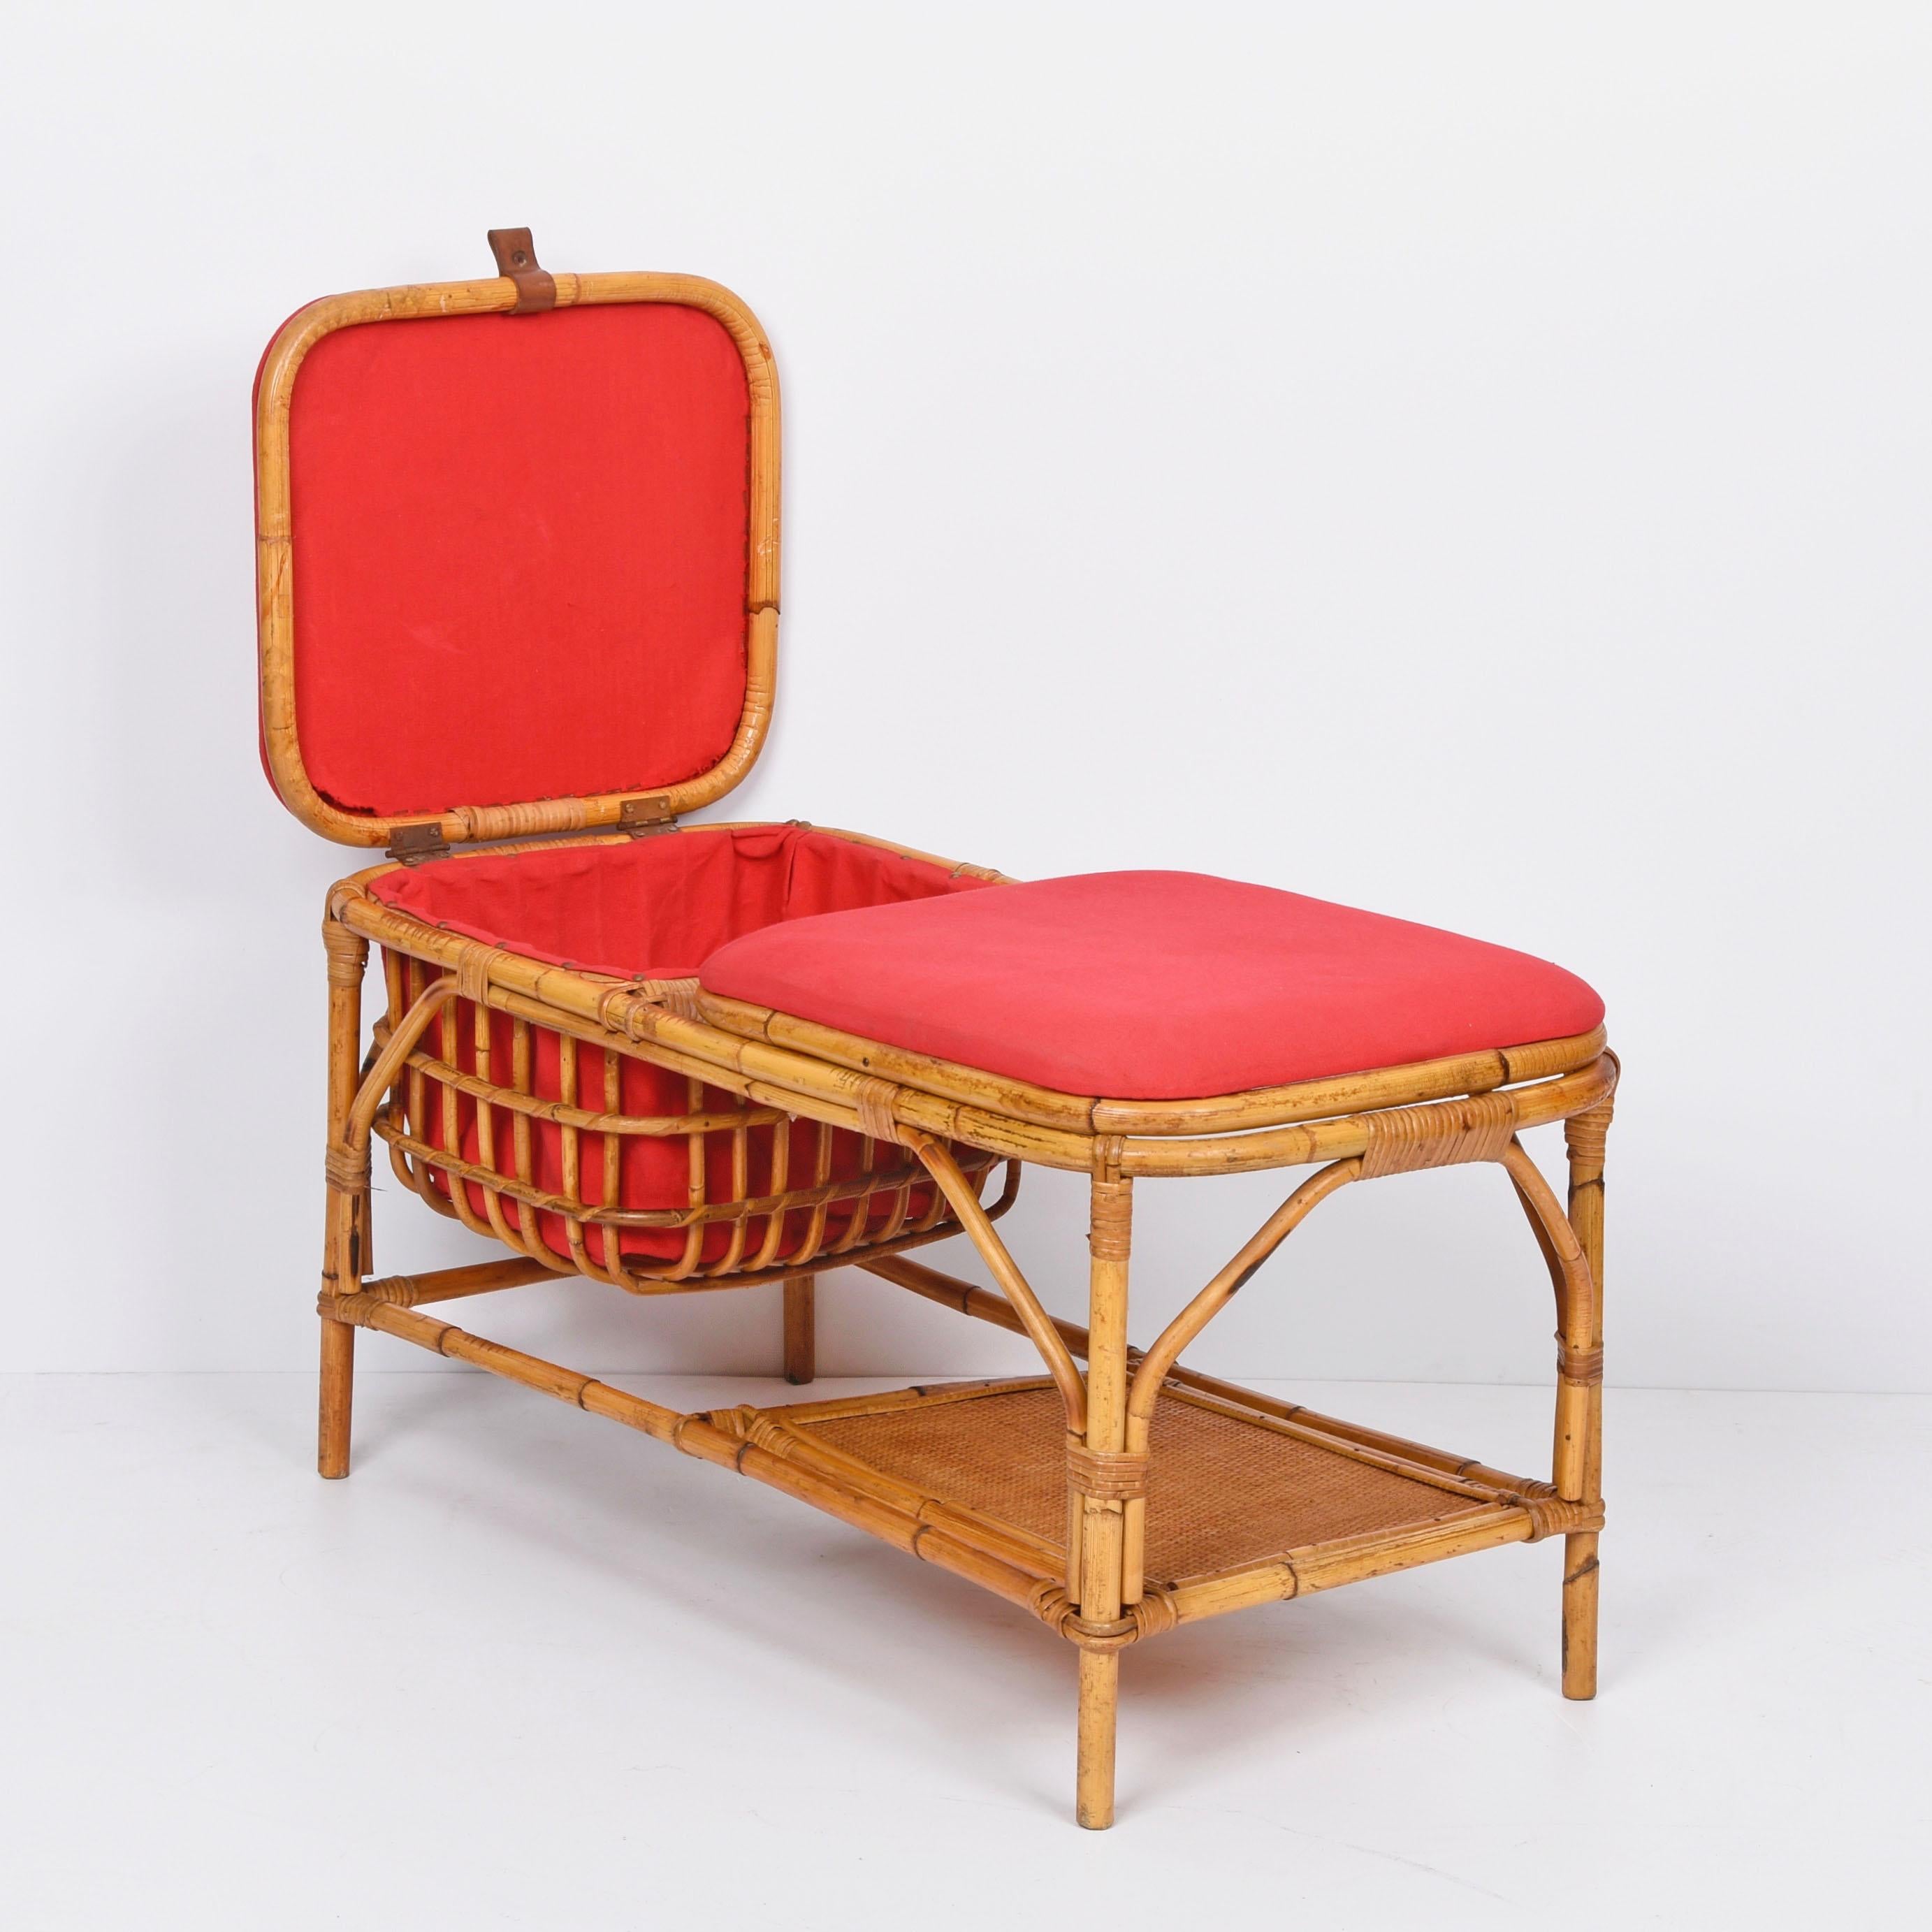 Midcentury Bamboo and Rattan Italian Bench with Box Case, 1950s For Sale 4